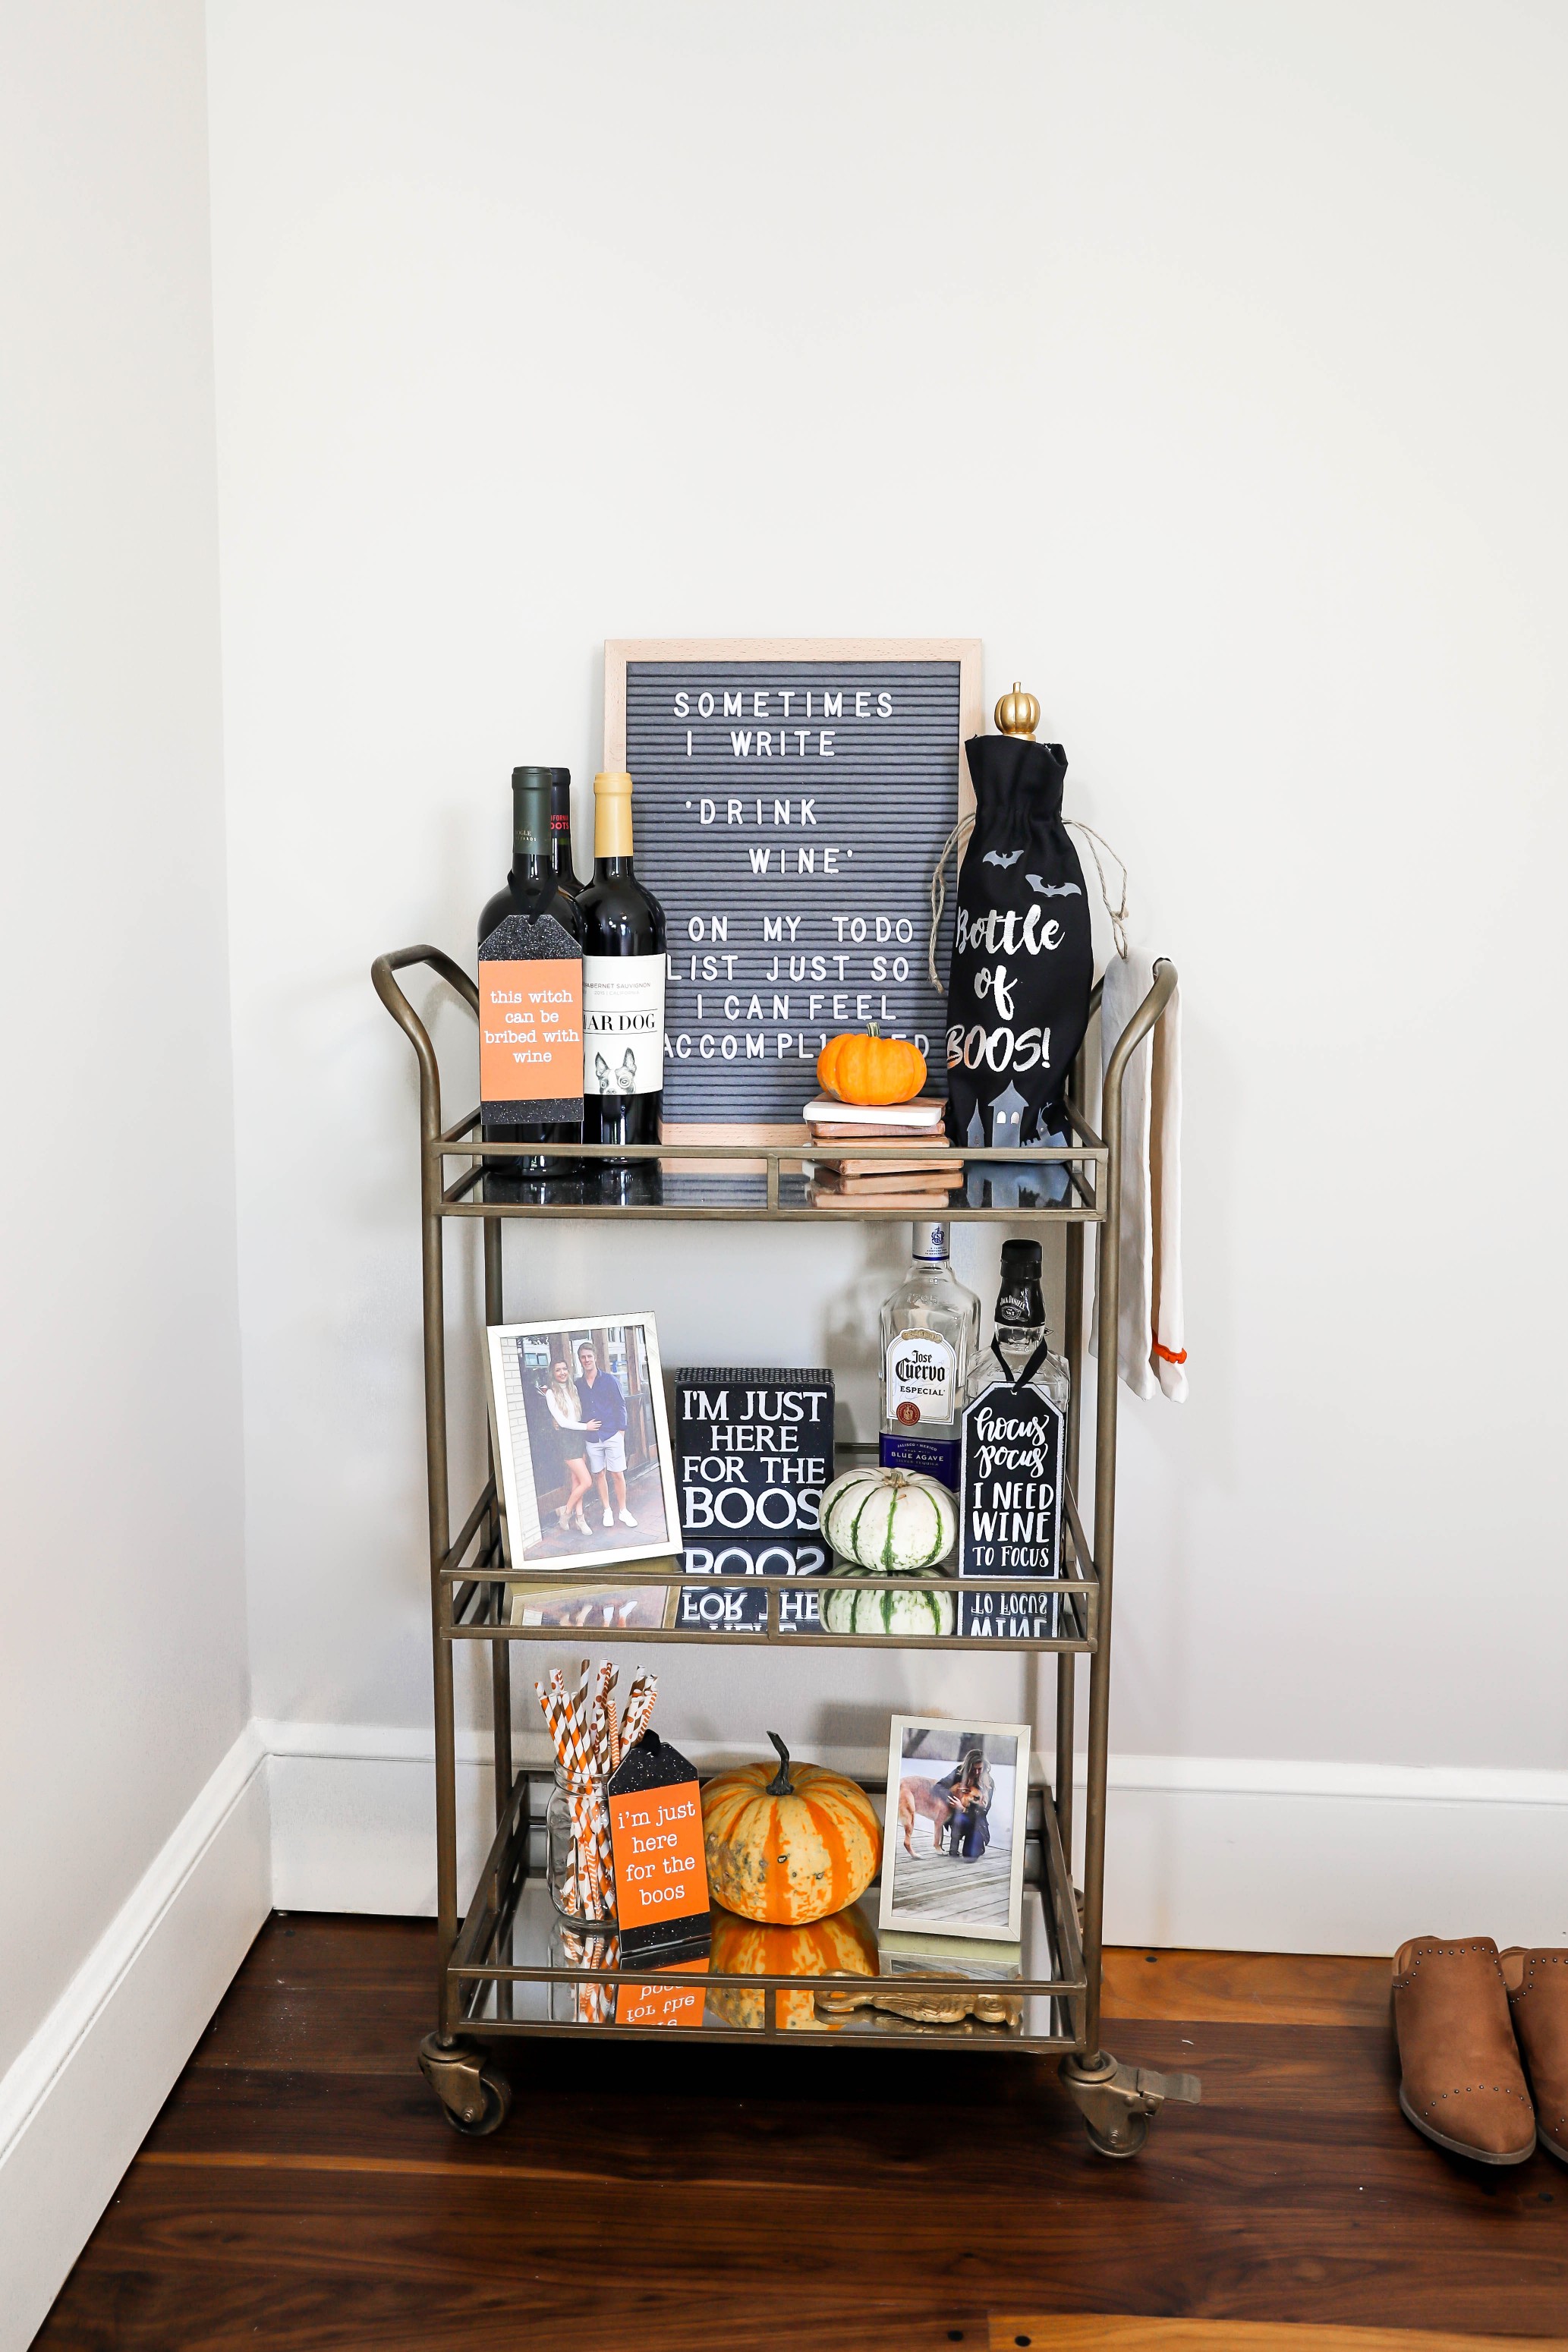 Fall bar cart ideas and fall room decor ideas! Inspiration for white and bright room! Check out this fashion blogger's room tour! I love decorating my house for autumn! Details on fashion and lifestyle blog daily dose of charm by lauren lindmark